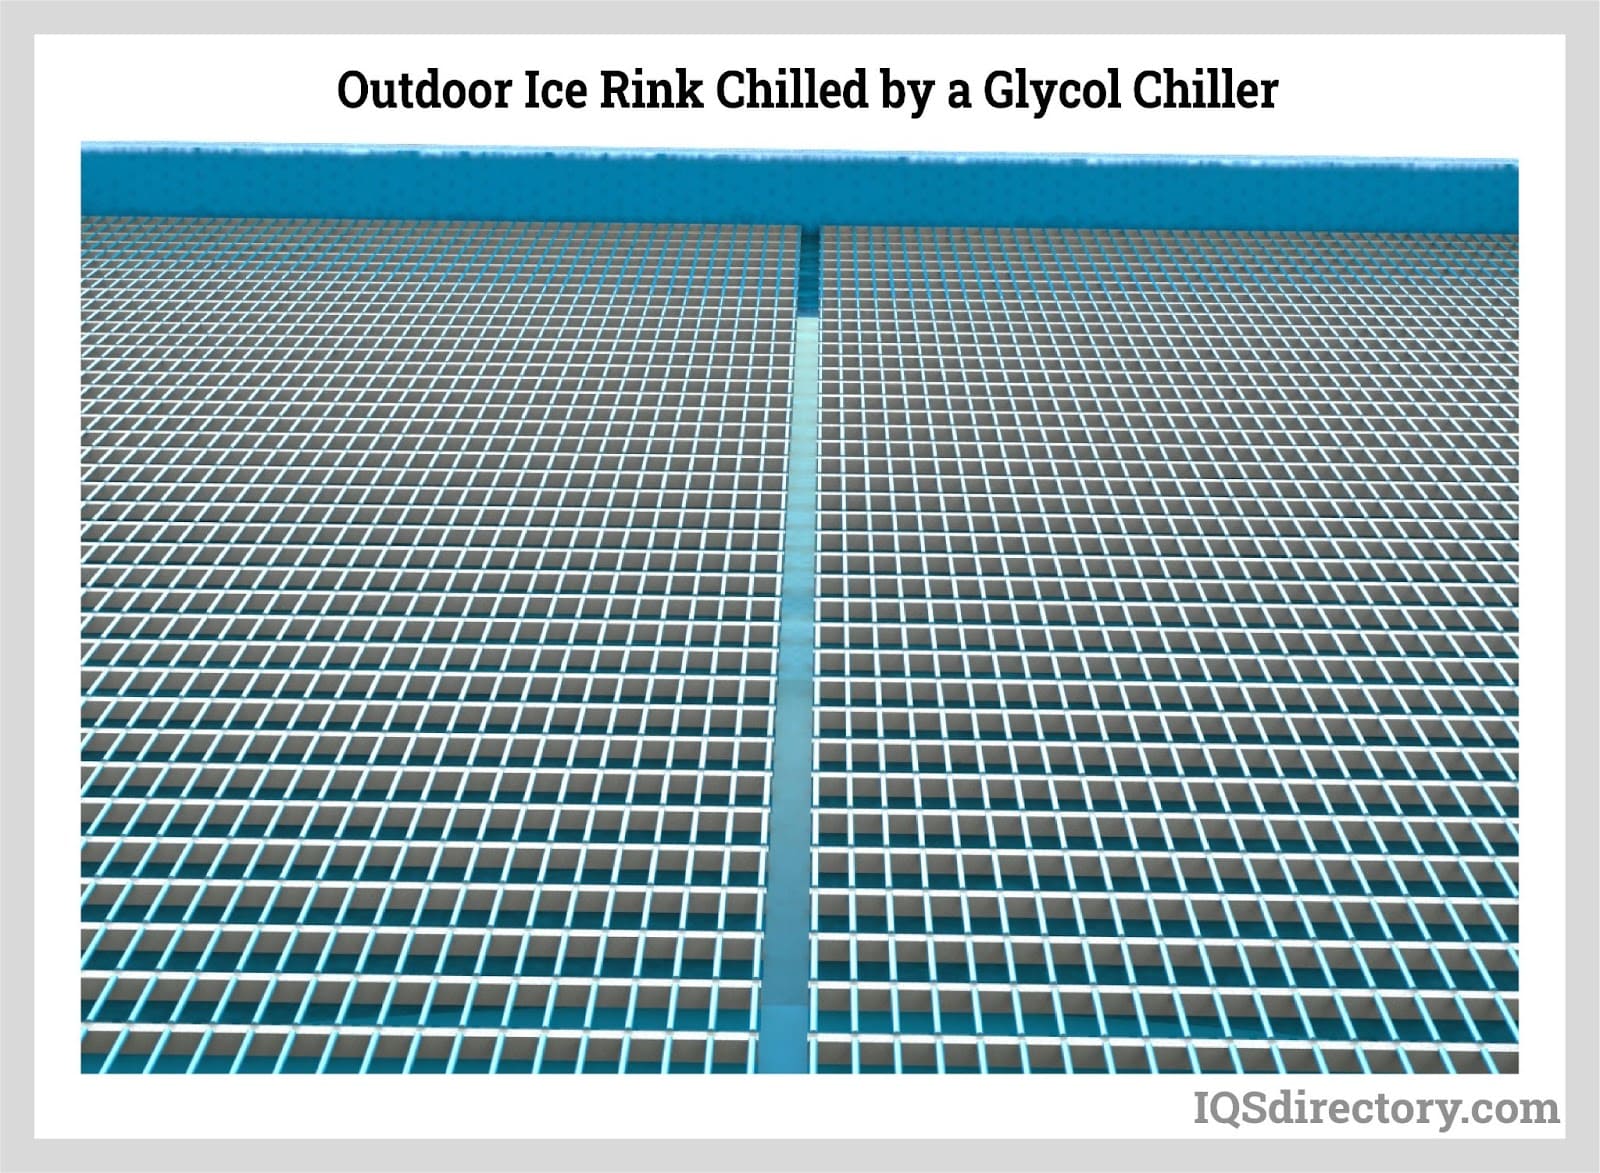 Outdoor Ice Rink Chilled by a Glycol Chiller